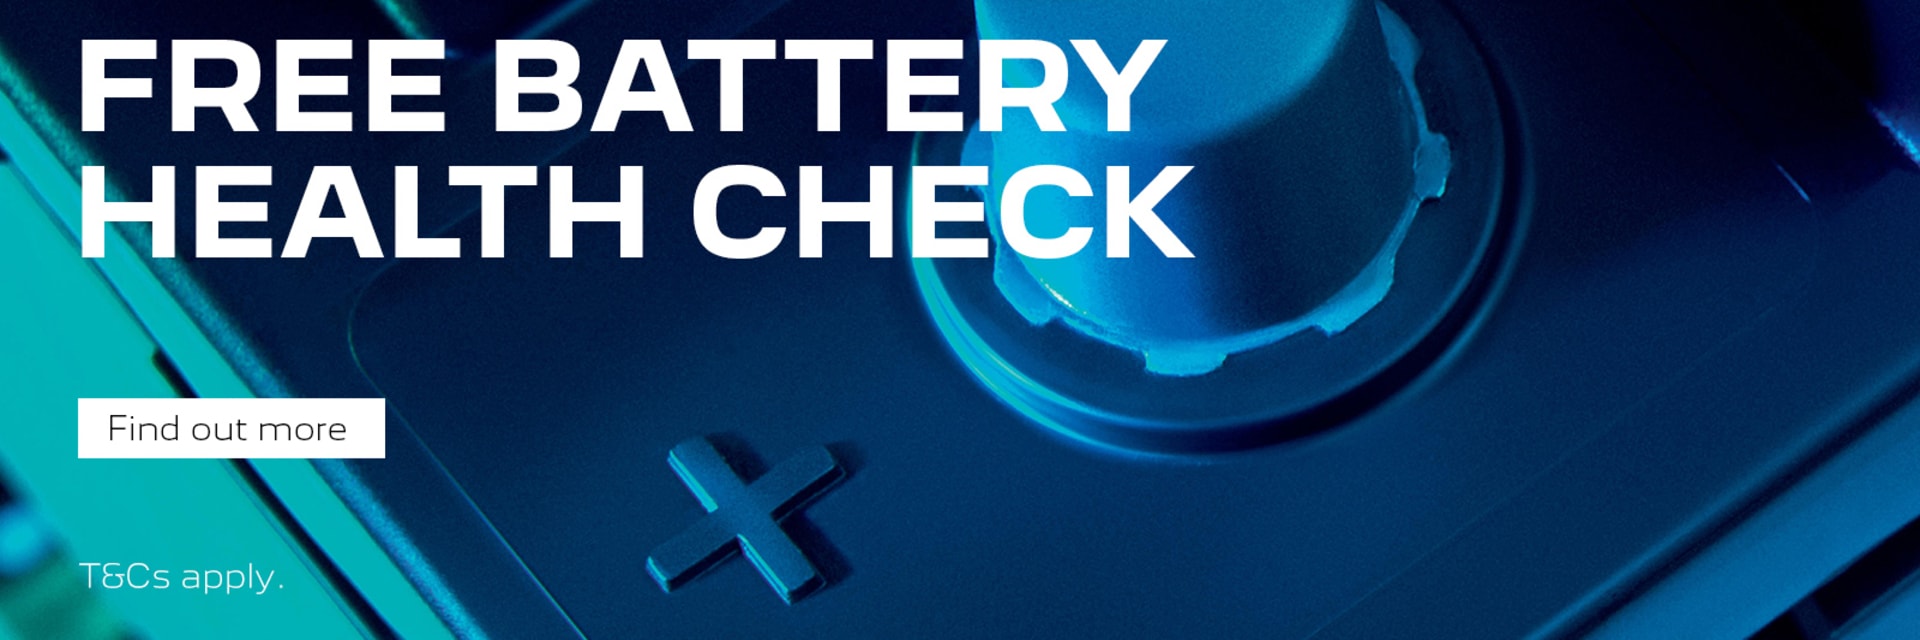 FREE Battery Health Check